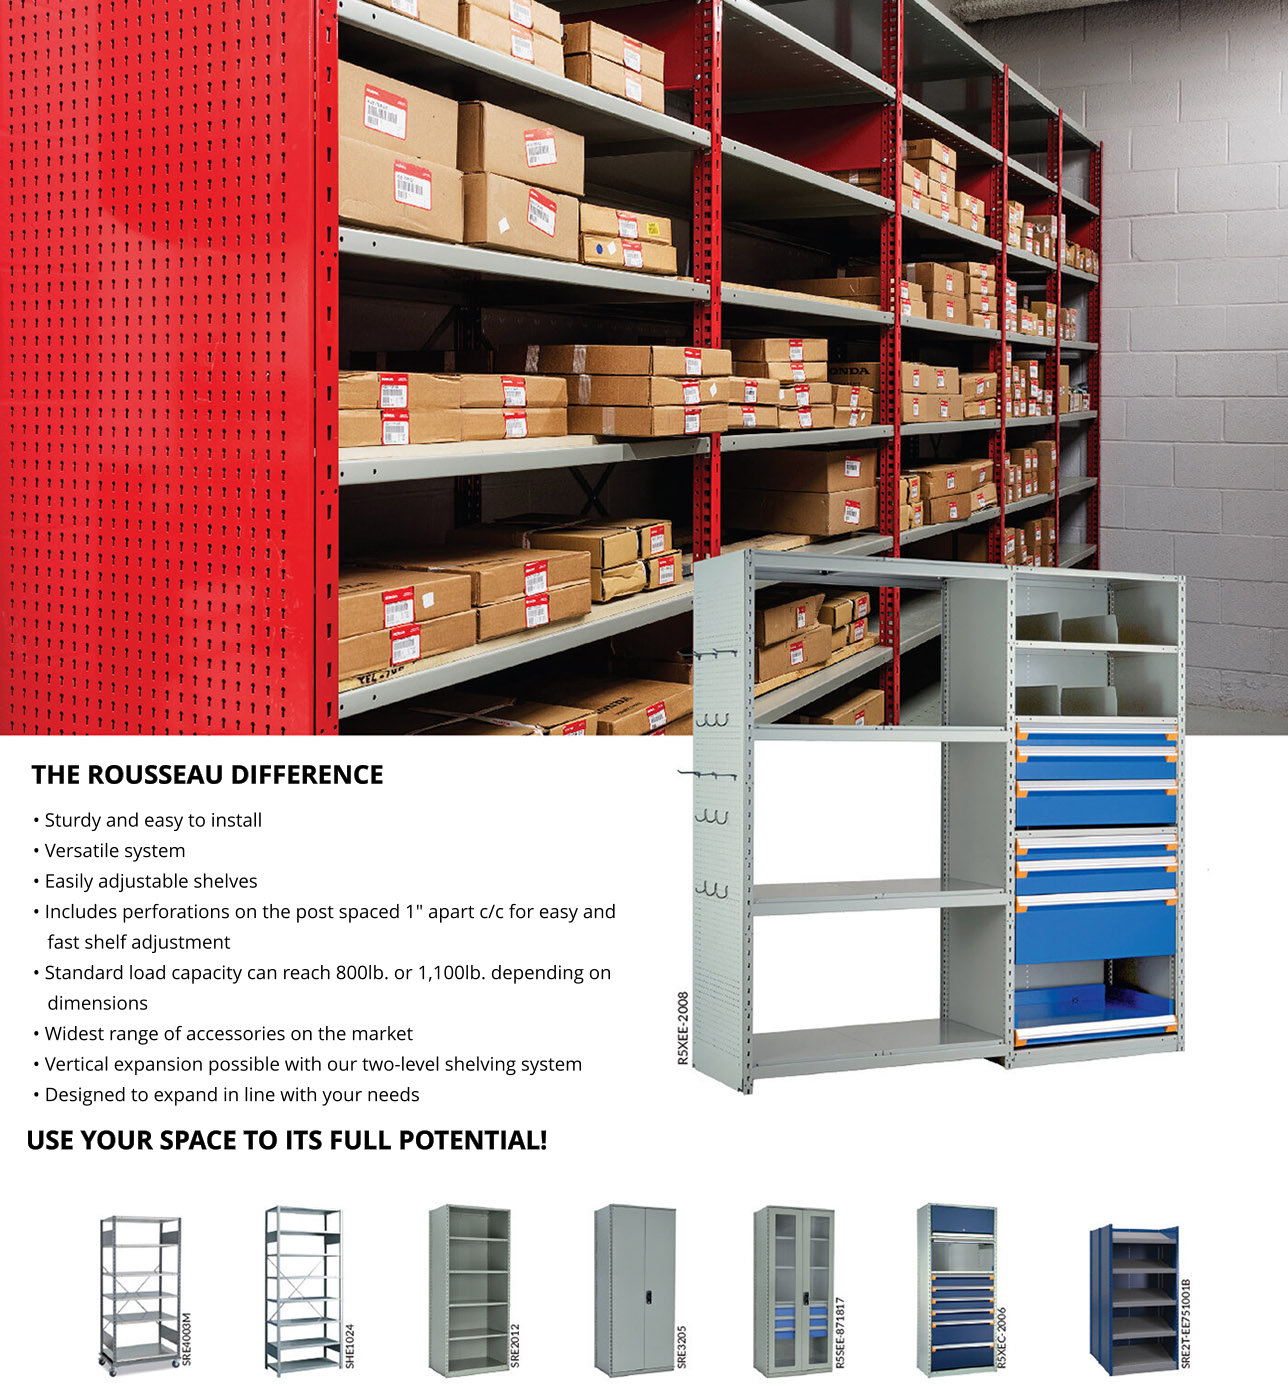 Industrial Shelving - Shelving with Modular Drawers